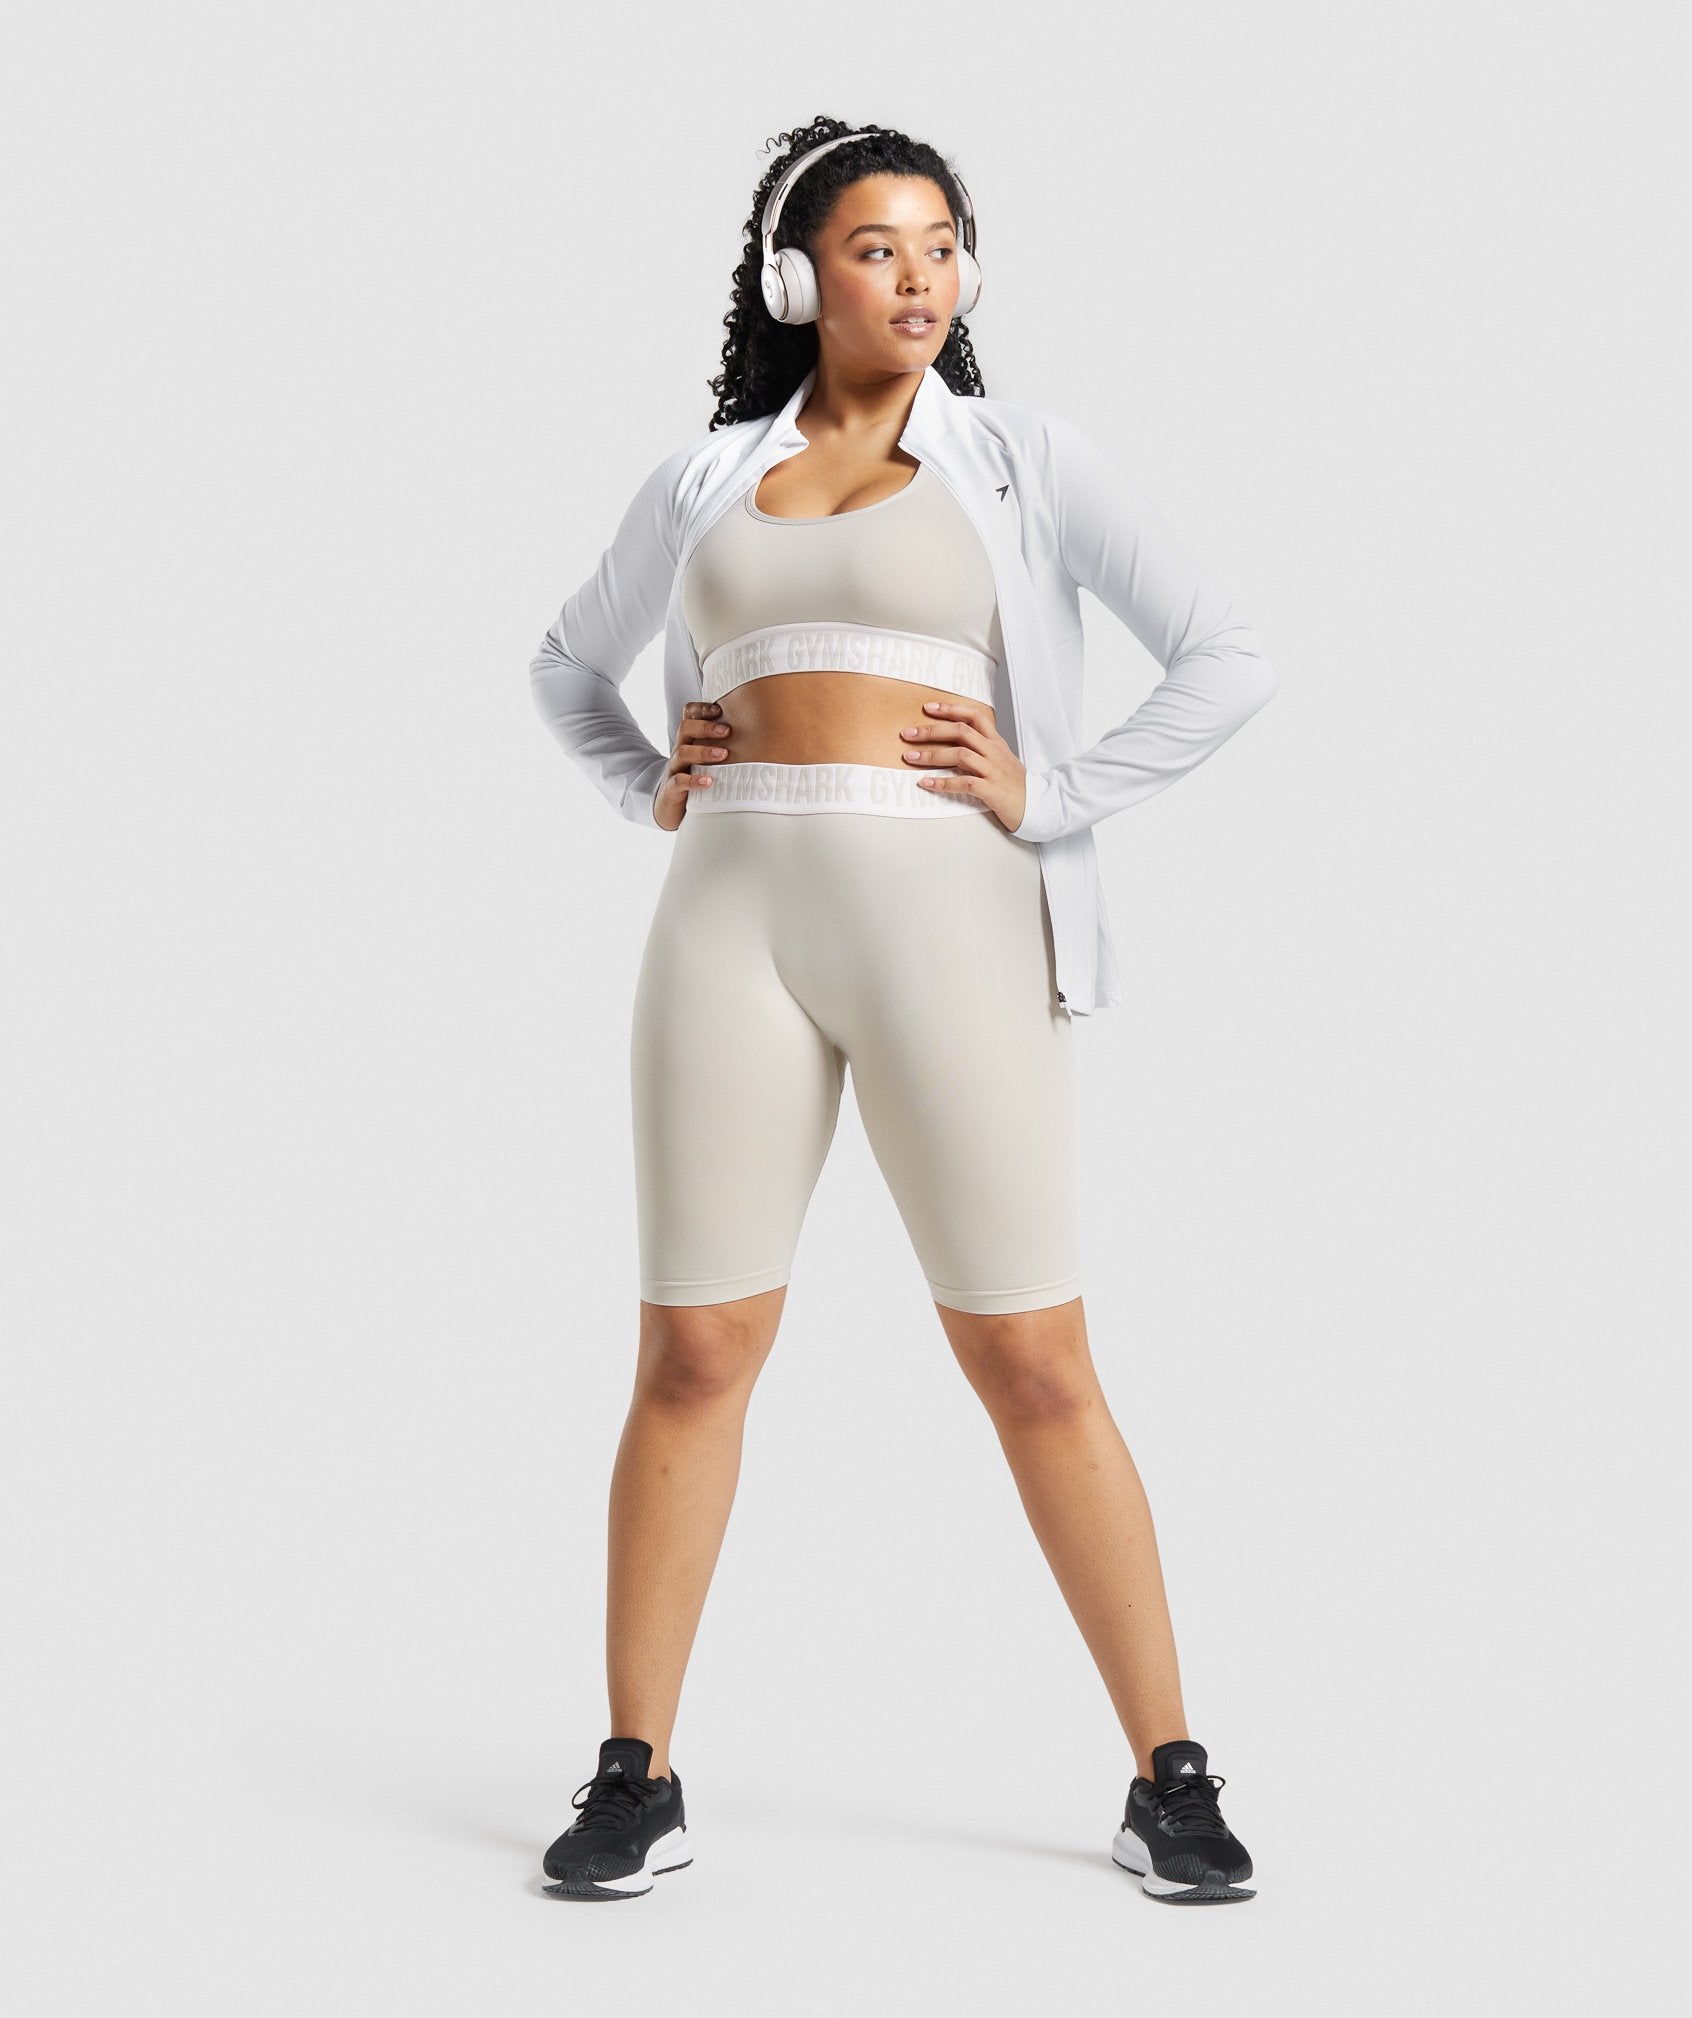 GYMSHARK Gymshark FIT CYCLING - Cuissard Femme moss grey/olive